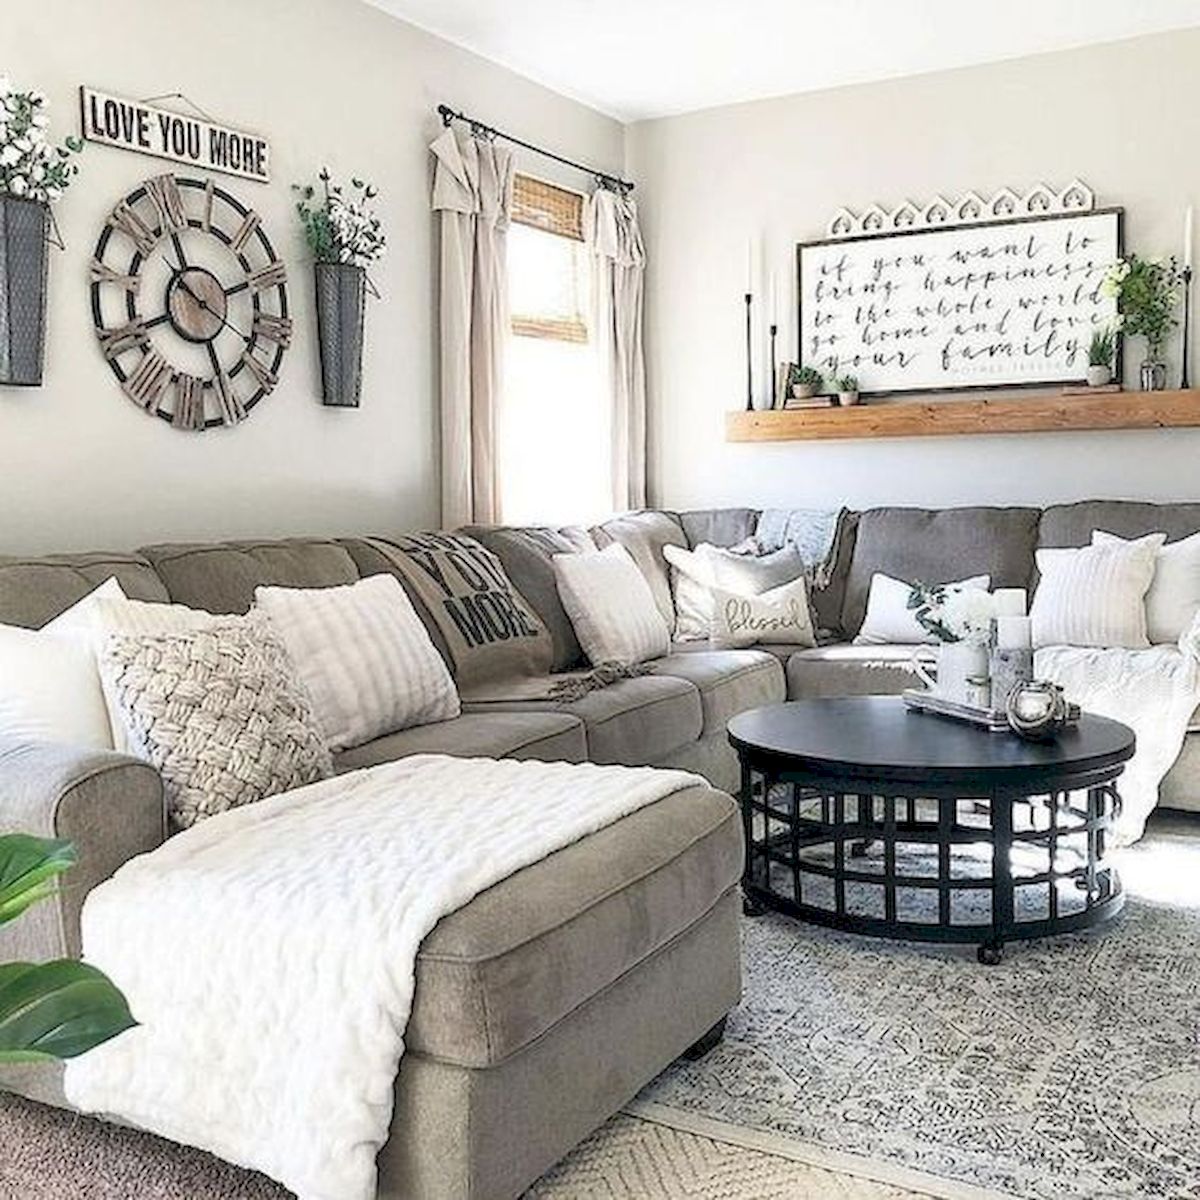 Farmhouse Living Room Wall Decor: Rustic Charm For Your Home